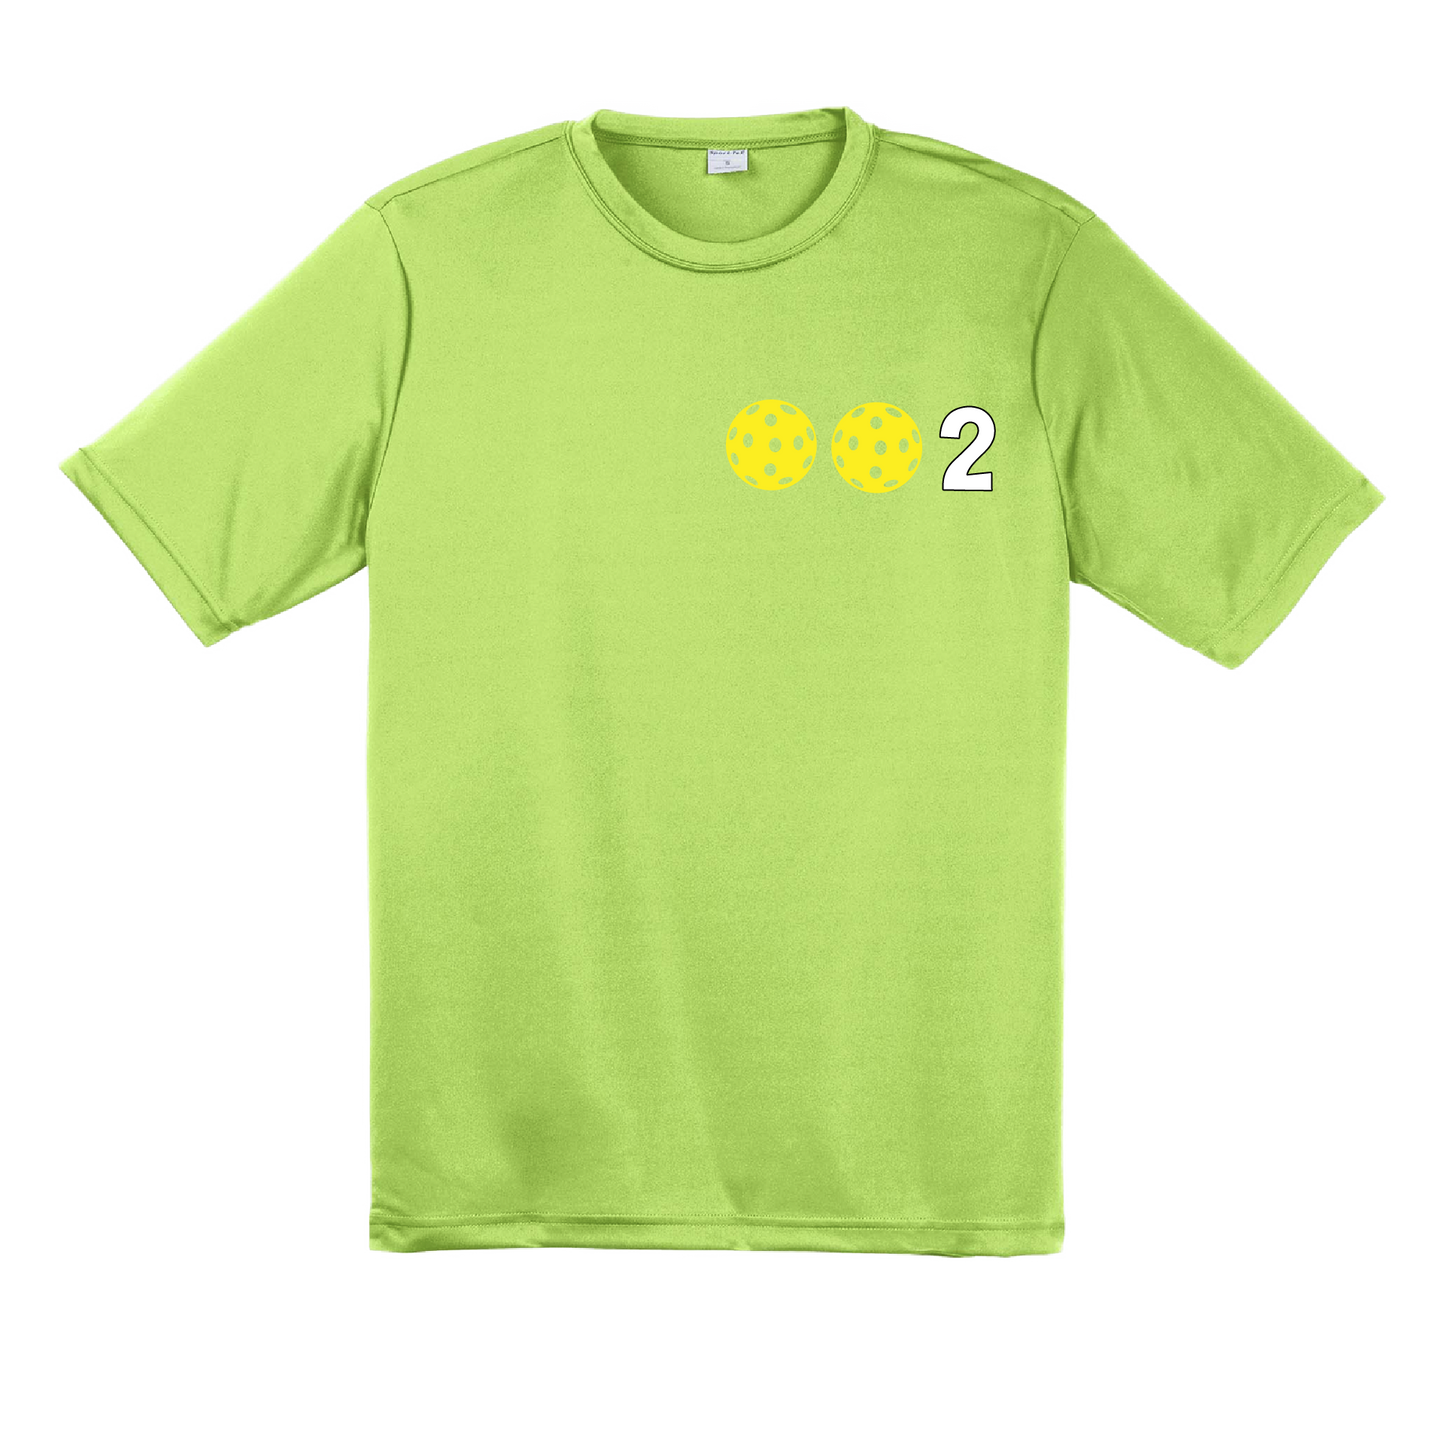 Design: 002 Pickleballs customizable color (Yellow, White, Cyan)  Men's Styles: Short Sleeve  Shirts are lightweight, roomy and highly breathable. These moisture-wicking shirts are designed for athletic performance. They feature PosiCharge technology to lock in color and prevent logos from fading. Removable tag and set-in sleeves for comfort